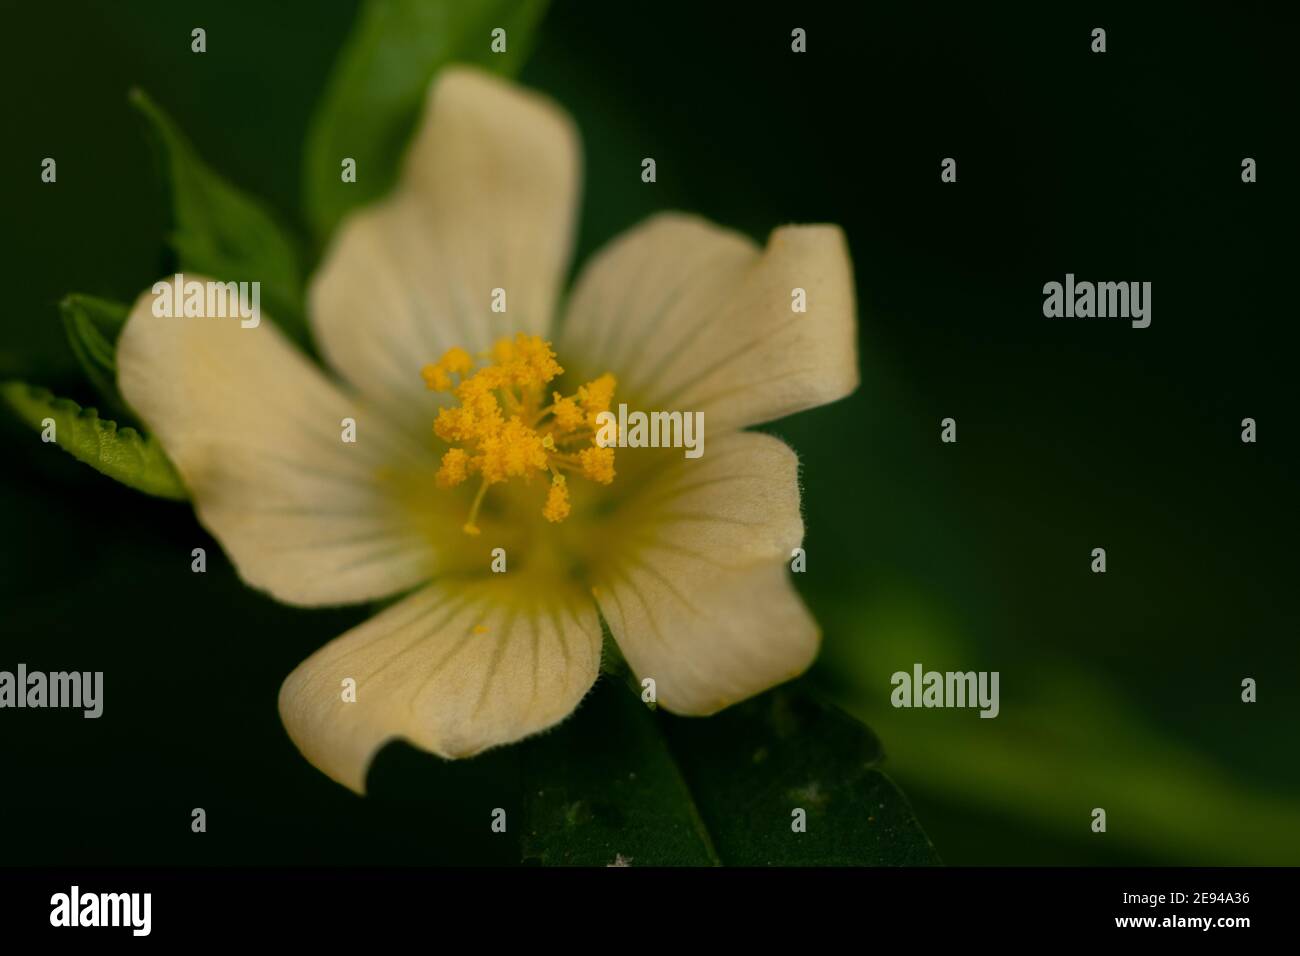 A wild flower with off white petals and yellow center Stock Photo